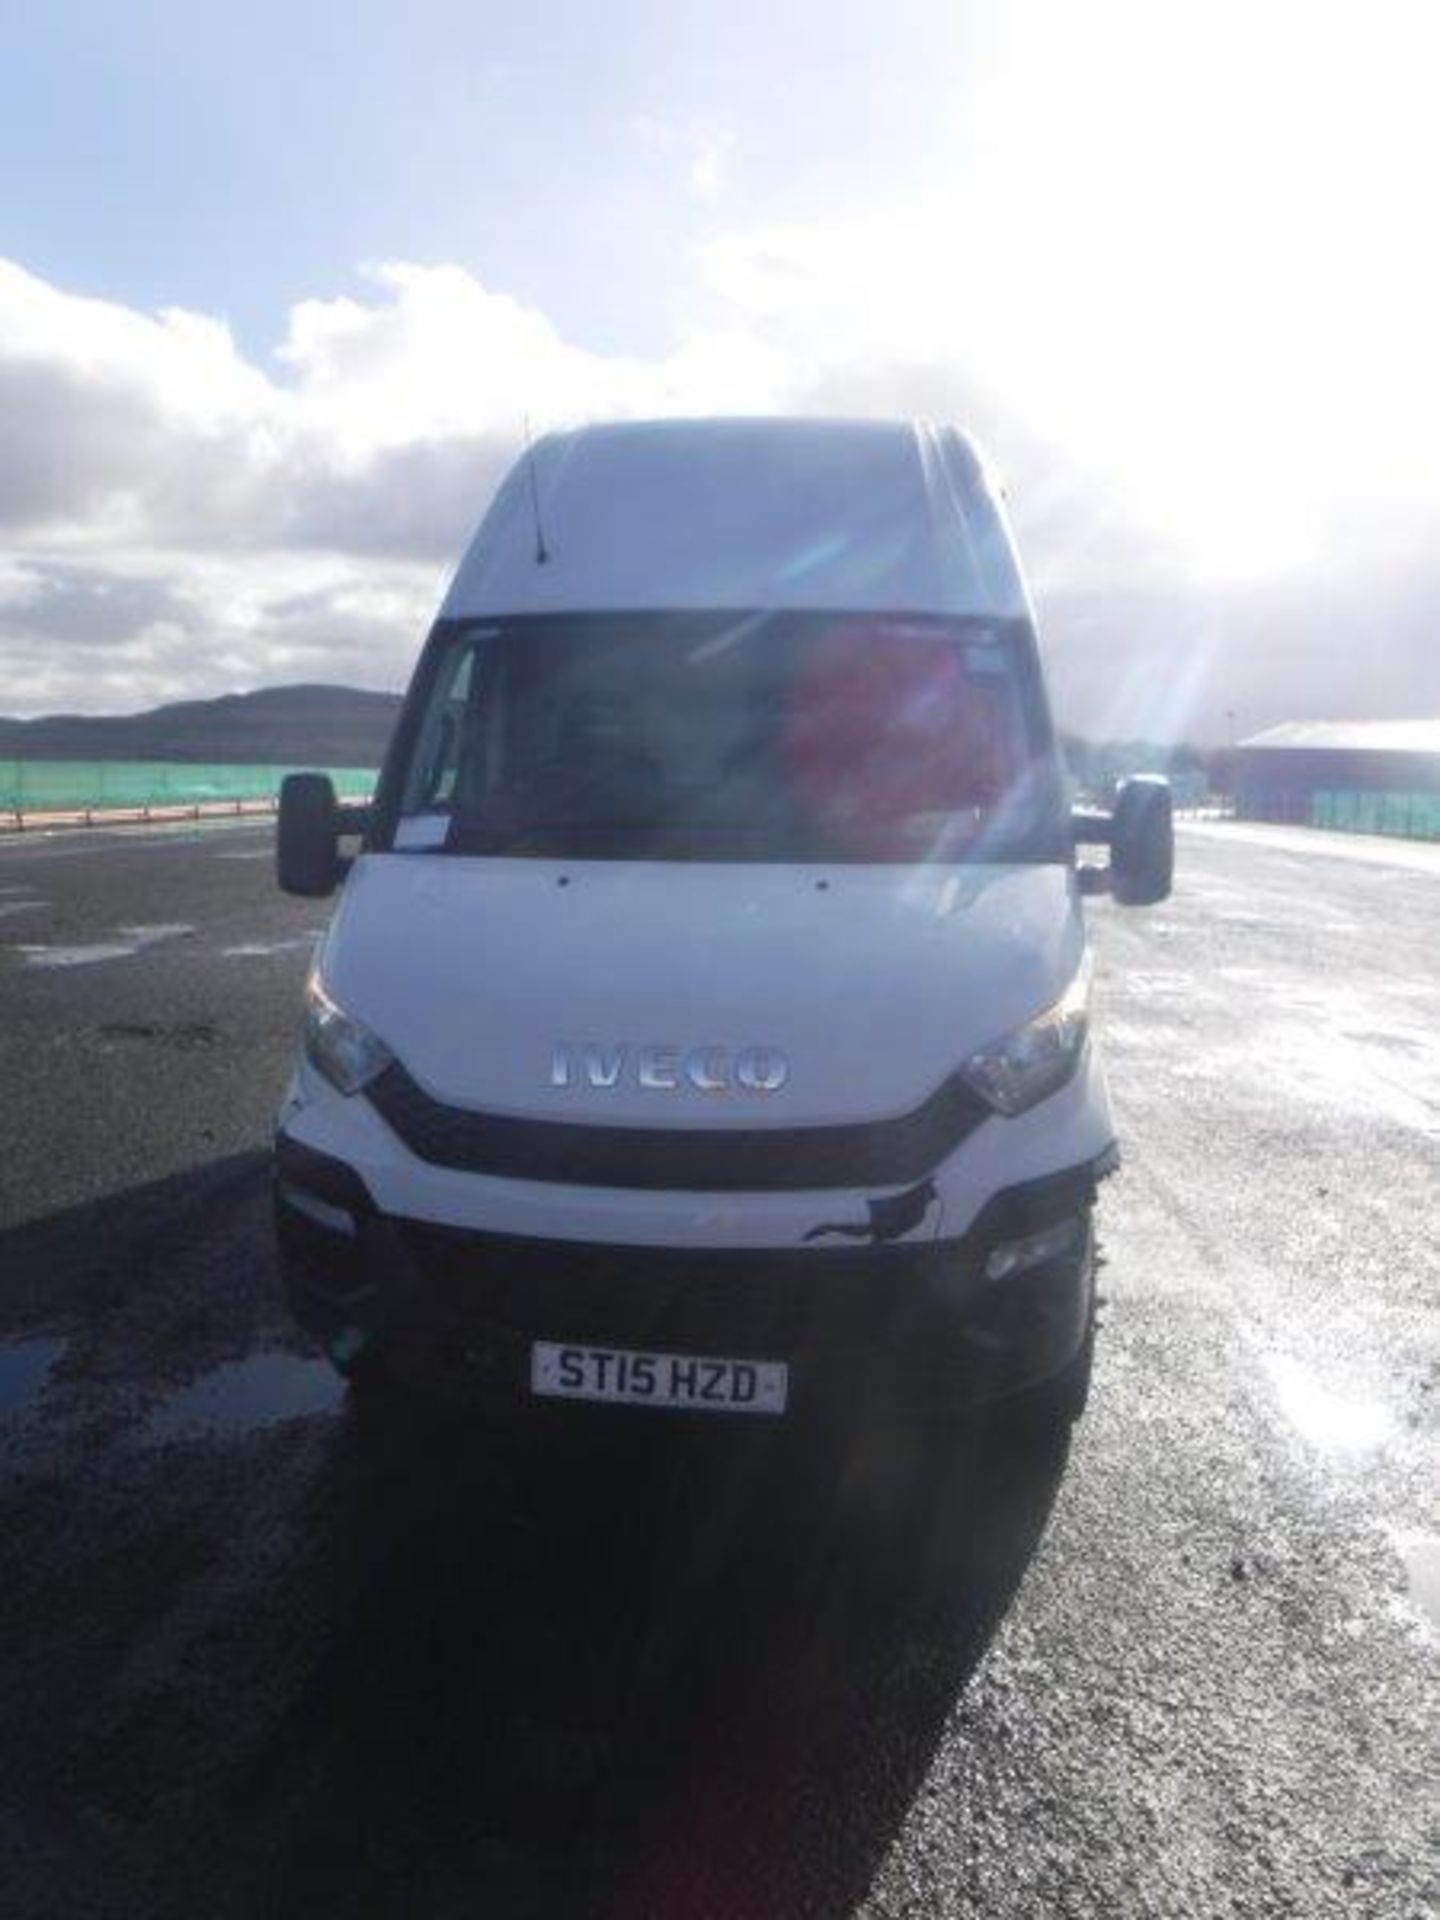 IVECO DAILY 70C17 - 2998cc - Image 11 of 18